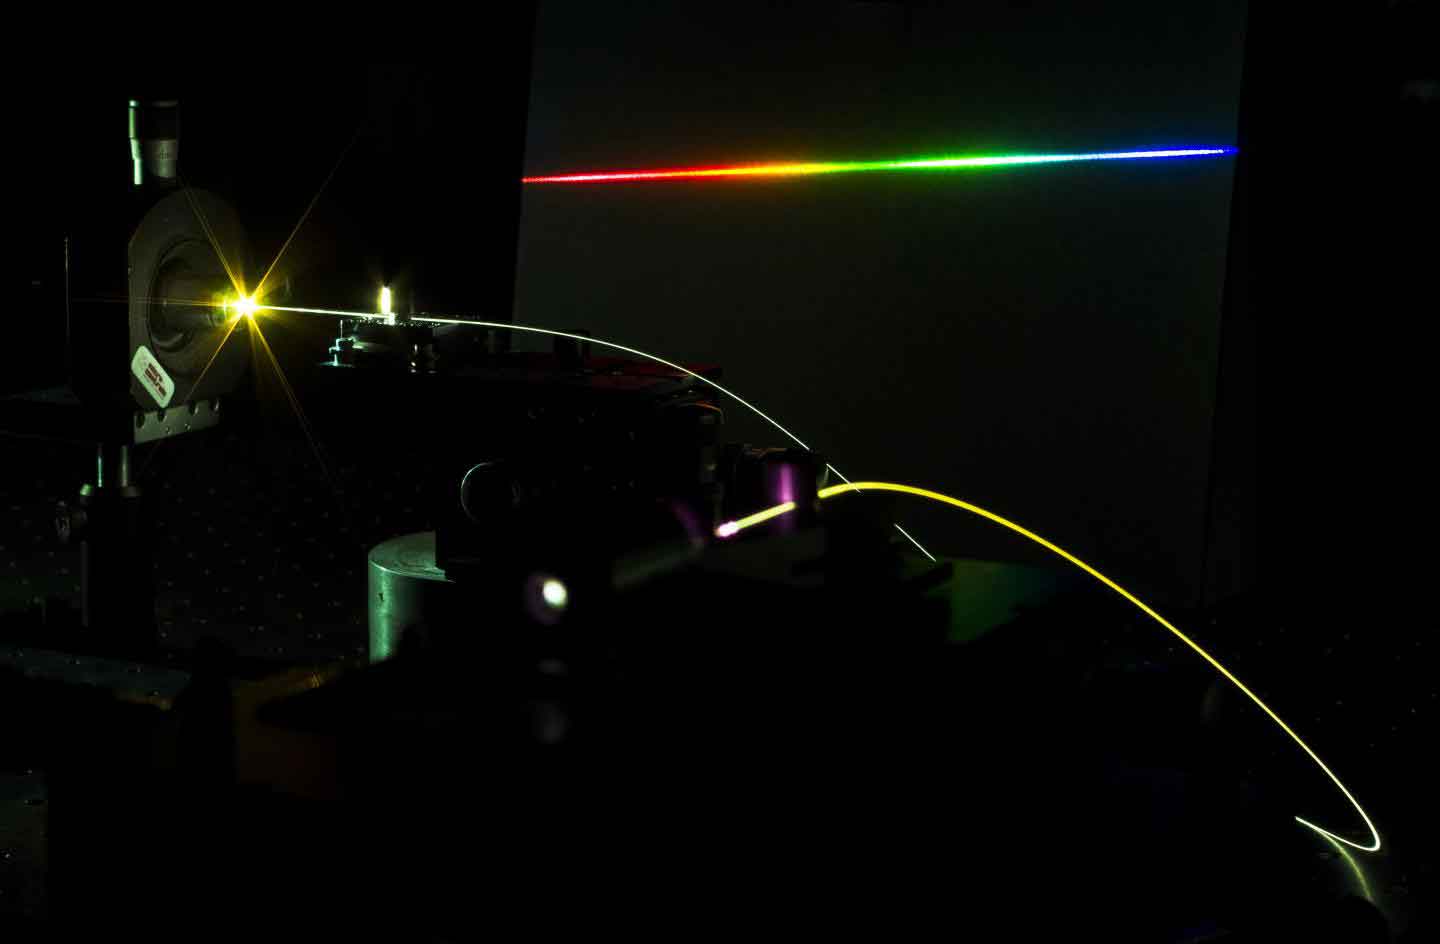 An ultrashort pulse is sent into an optical fibre and produces new frequency components via intense light-matter interactions. The progressive spectral broadening of the initial light pulse occurring during propagation, ultimately leads to the formation of a so-called supercontinuum. In the example here, this corresponds to a "white light" source which, similarly to a rainbow, is composed of all the colours seen in the visible region of the electromagnetic spectrum.  CREDIT Benjamin Wetzel